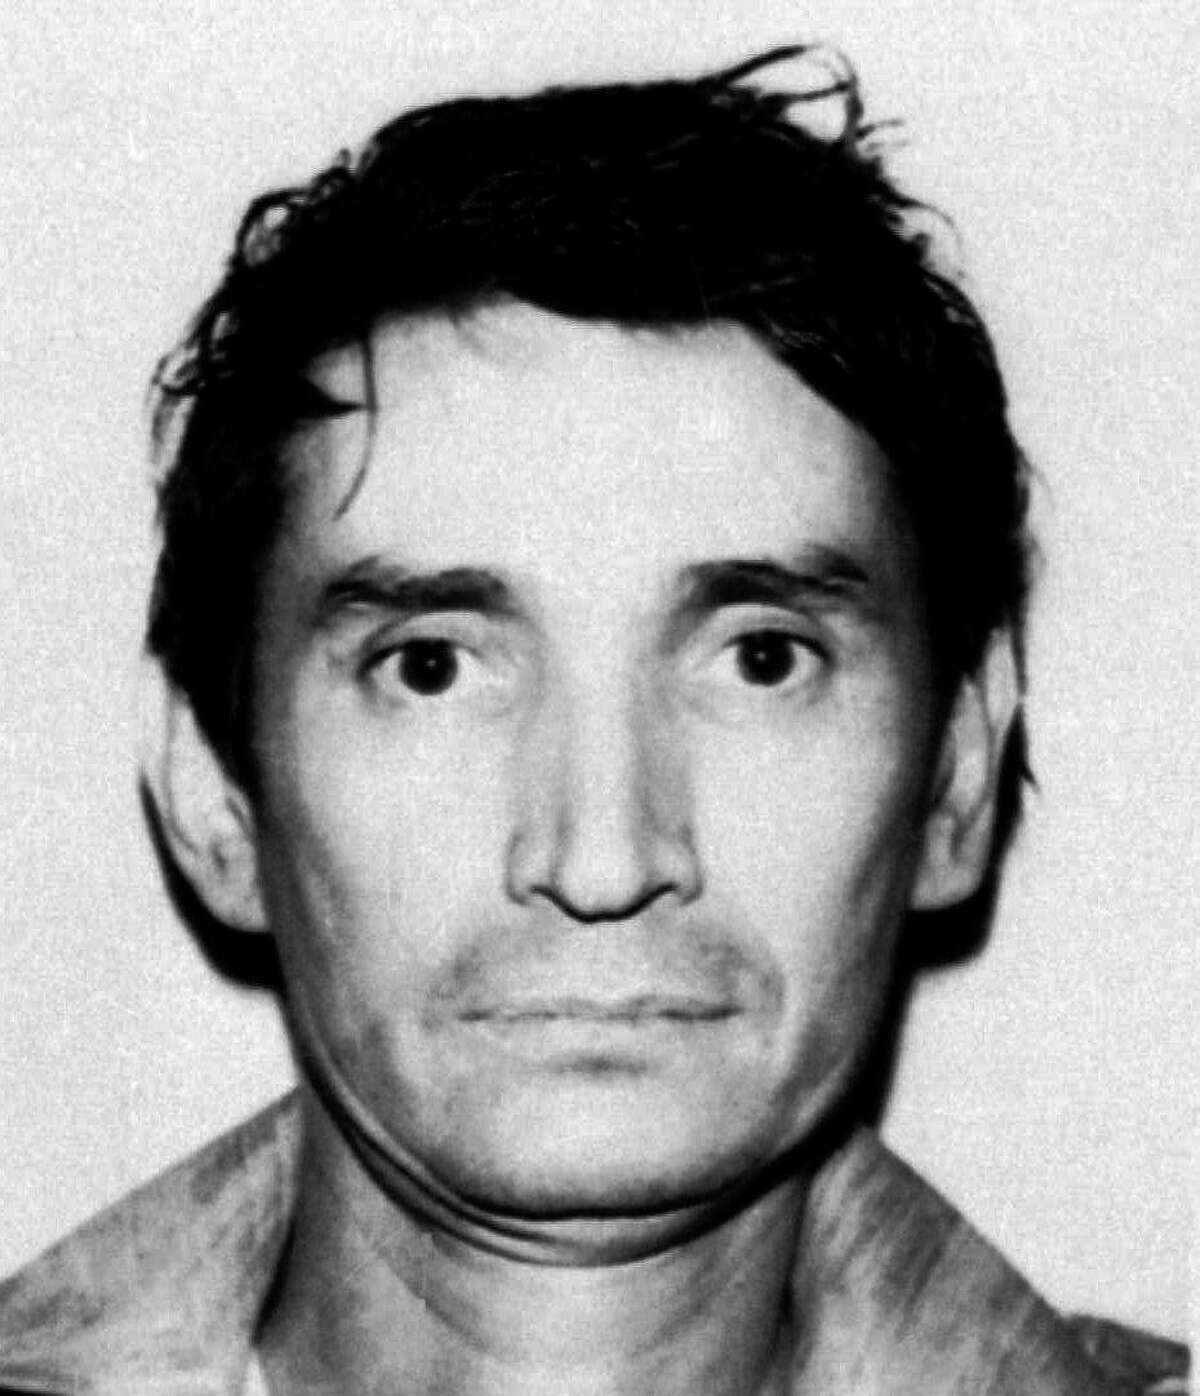 Félix Gallardo. In Sept. 2022, a Mexican judge granted Gallardo house arrest due to poor health, which is pending judicial review before approval. Gallardo has been detained in Mexico since 1989.